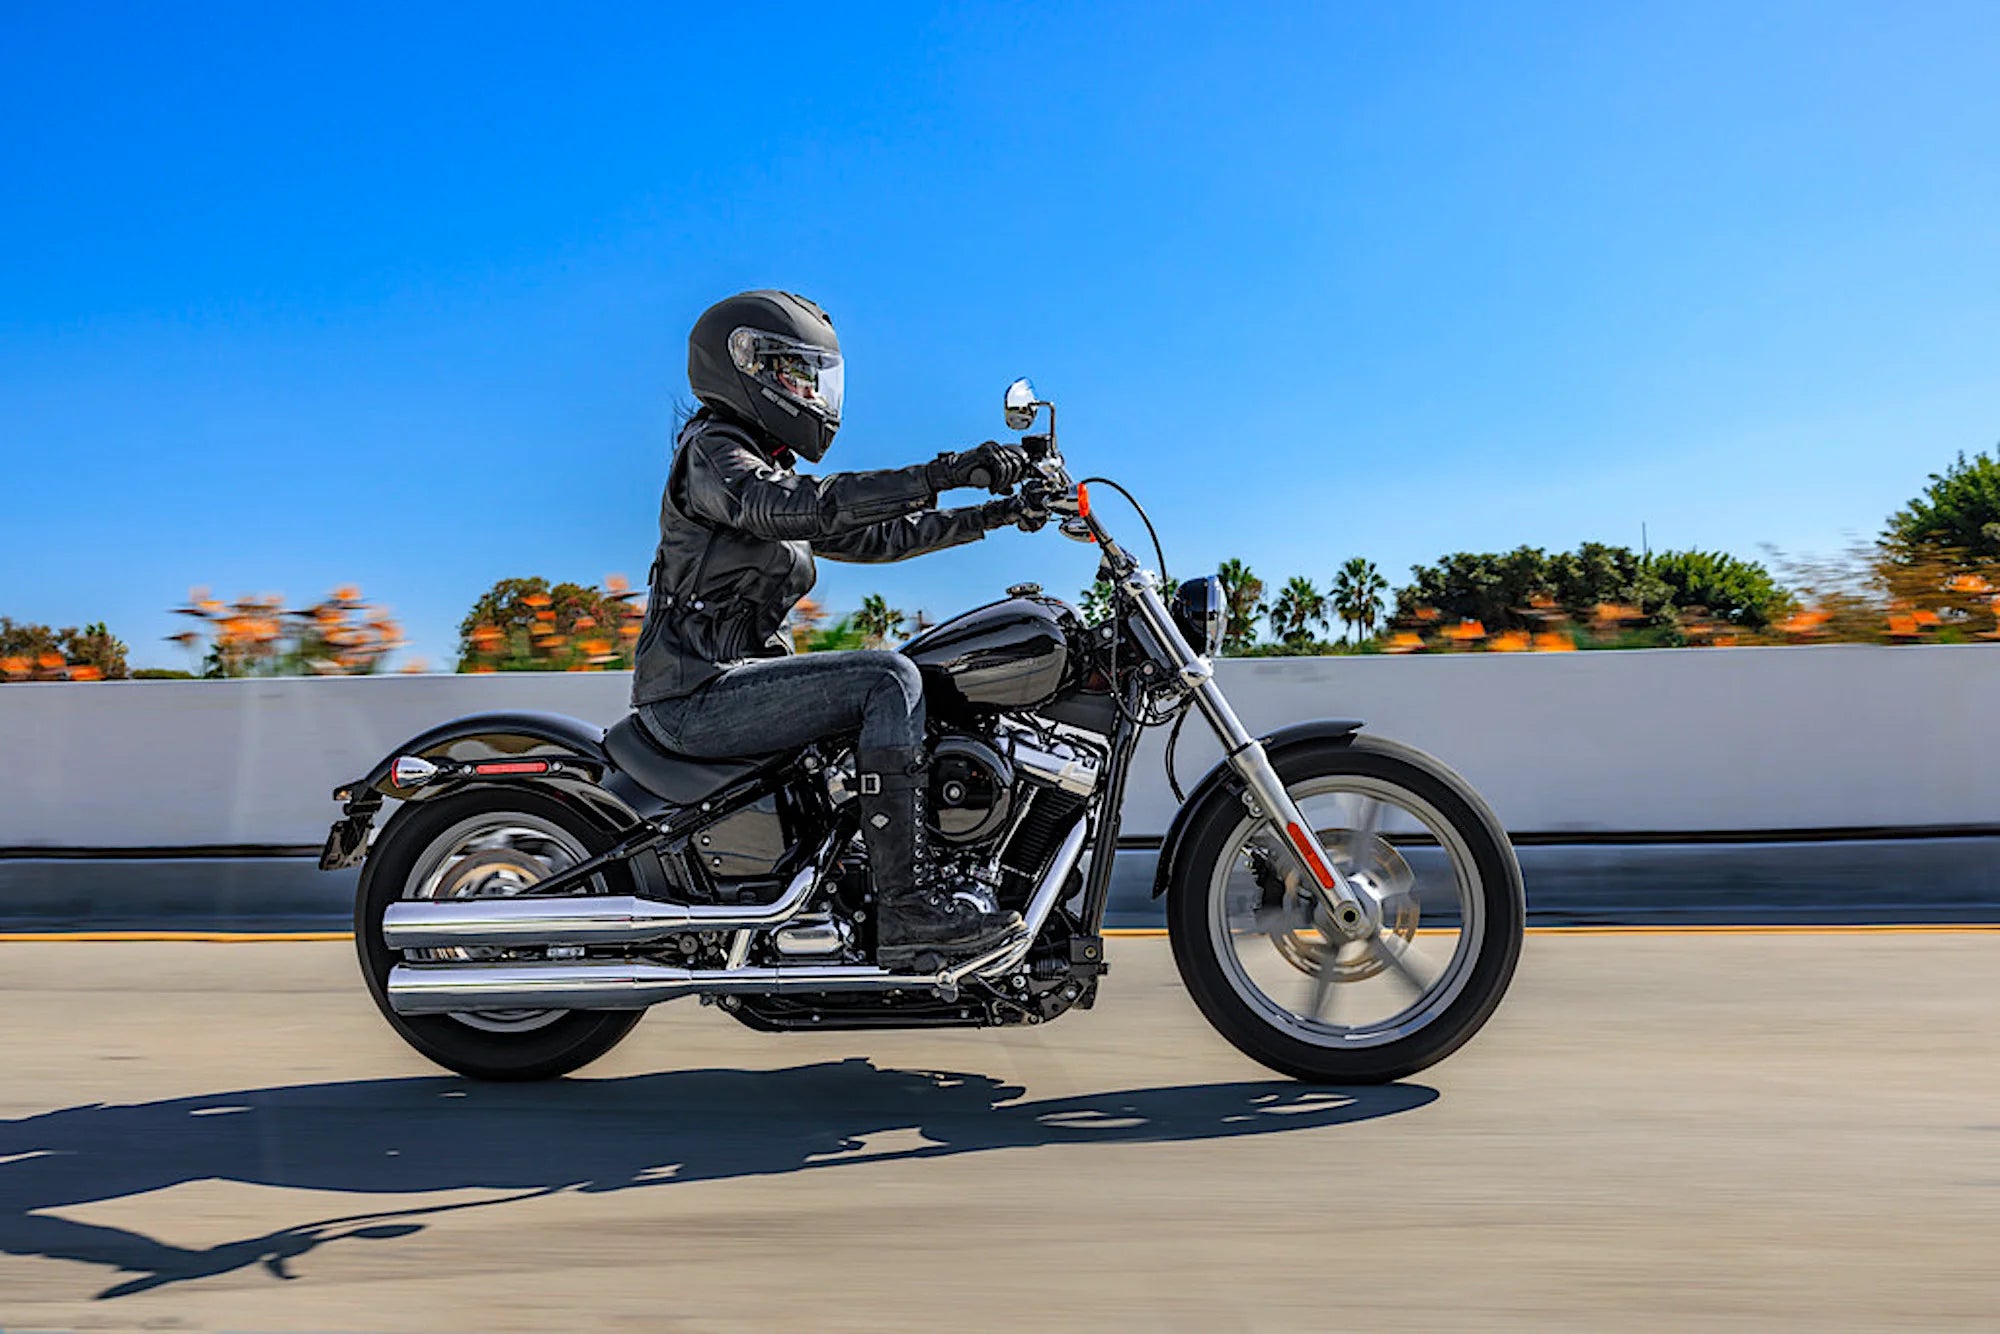 Harley-Davidson recalls 65,000 motorcycles due to potentially faulty part